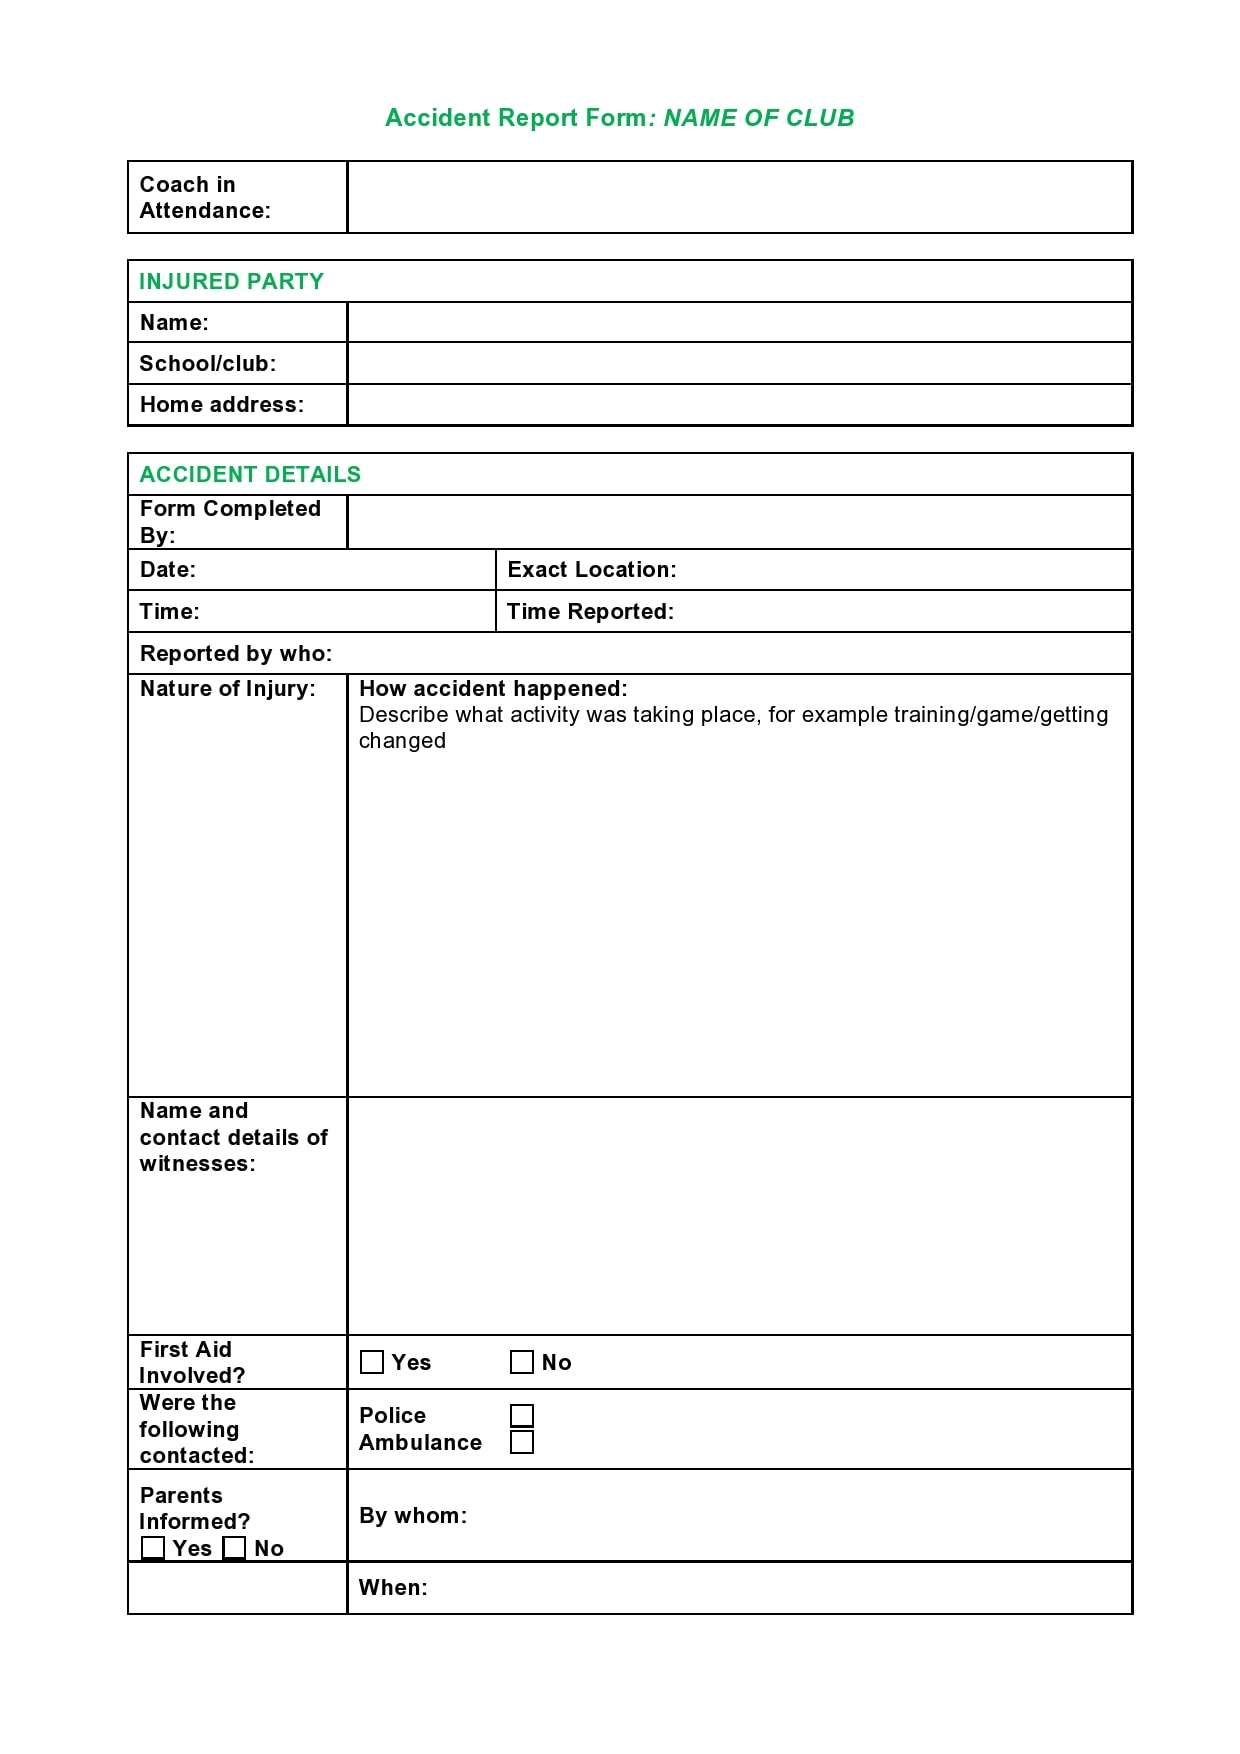 50 Accident Report Forms (Car, Work Injury, more...) TemplateArchive